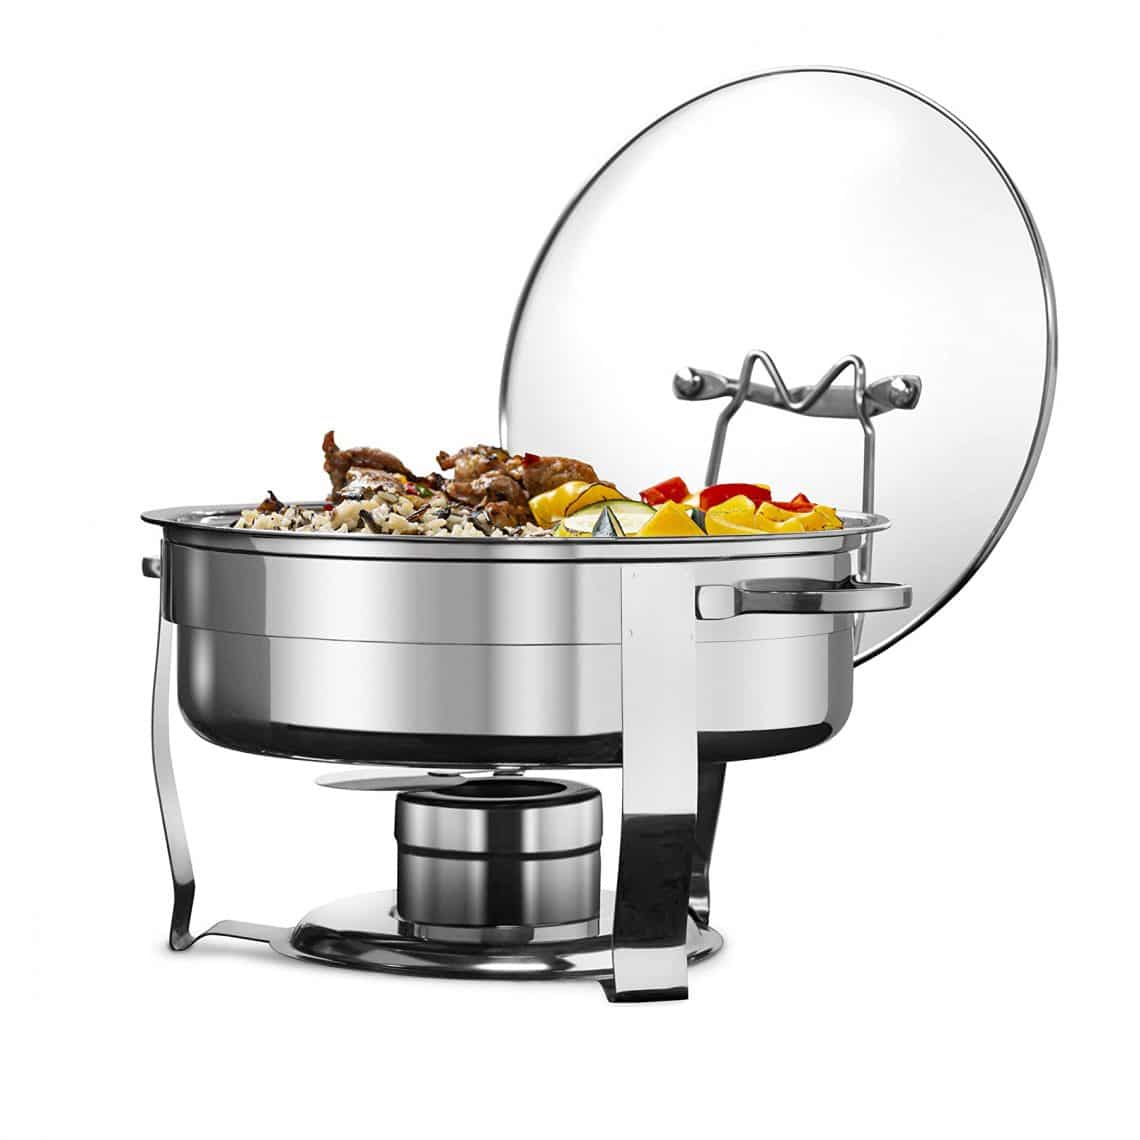 Top 10 Best Chafing Dishes in 2023 Reviews | Buying Guide